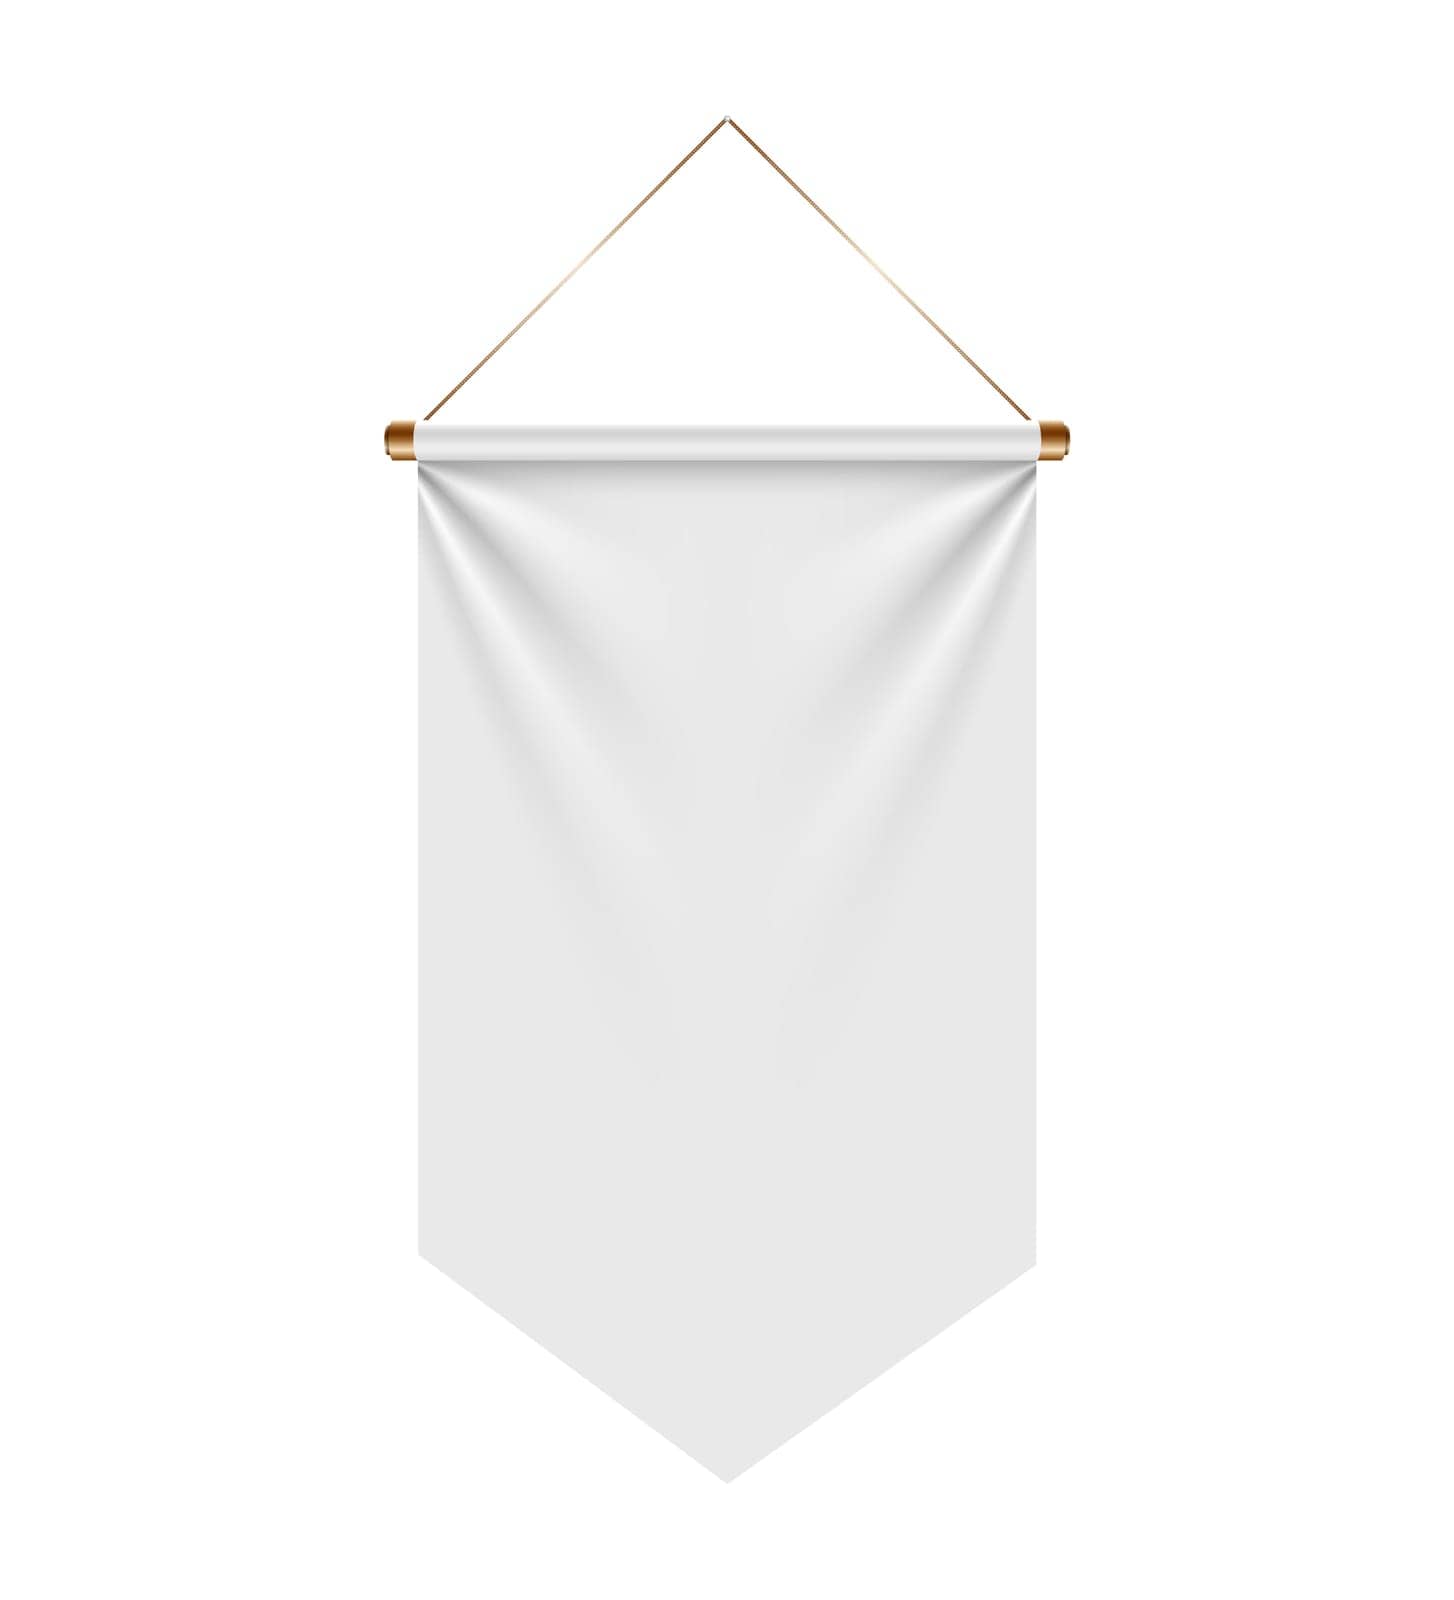 white banner hanging from a rope on a white background by jackreznor